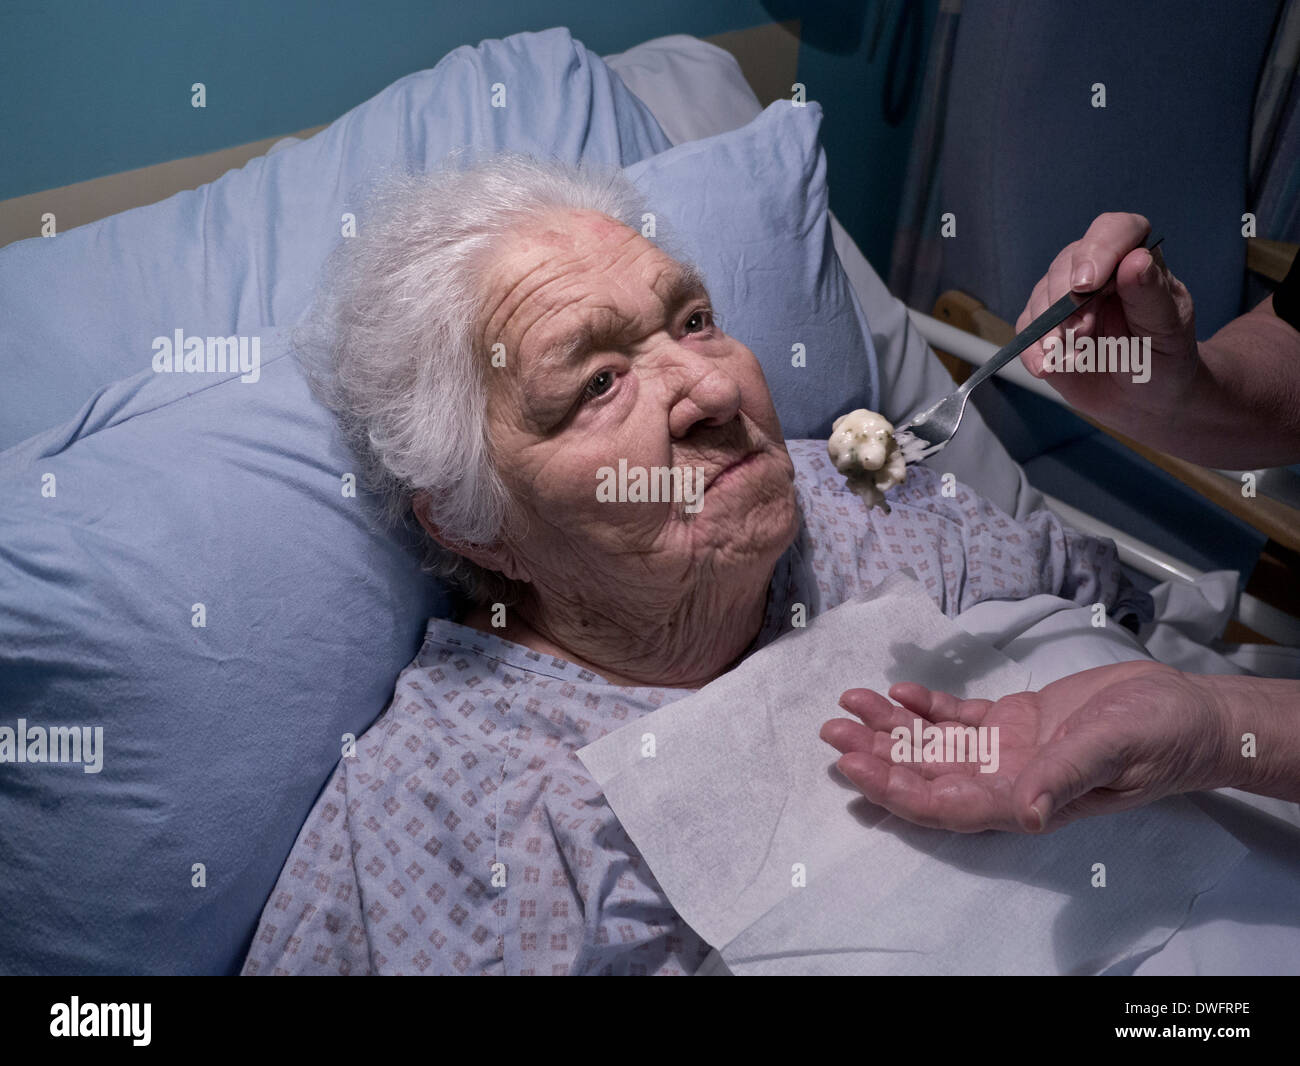 Elderly lady feeding food fed with carer attempting to feed her a meal with difficulty in hospital care bed at night Stock Photo